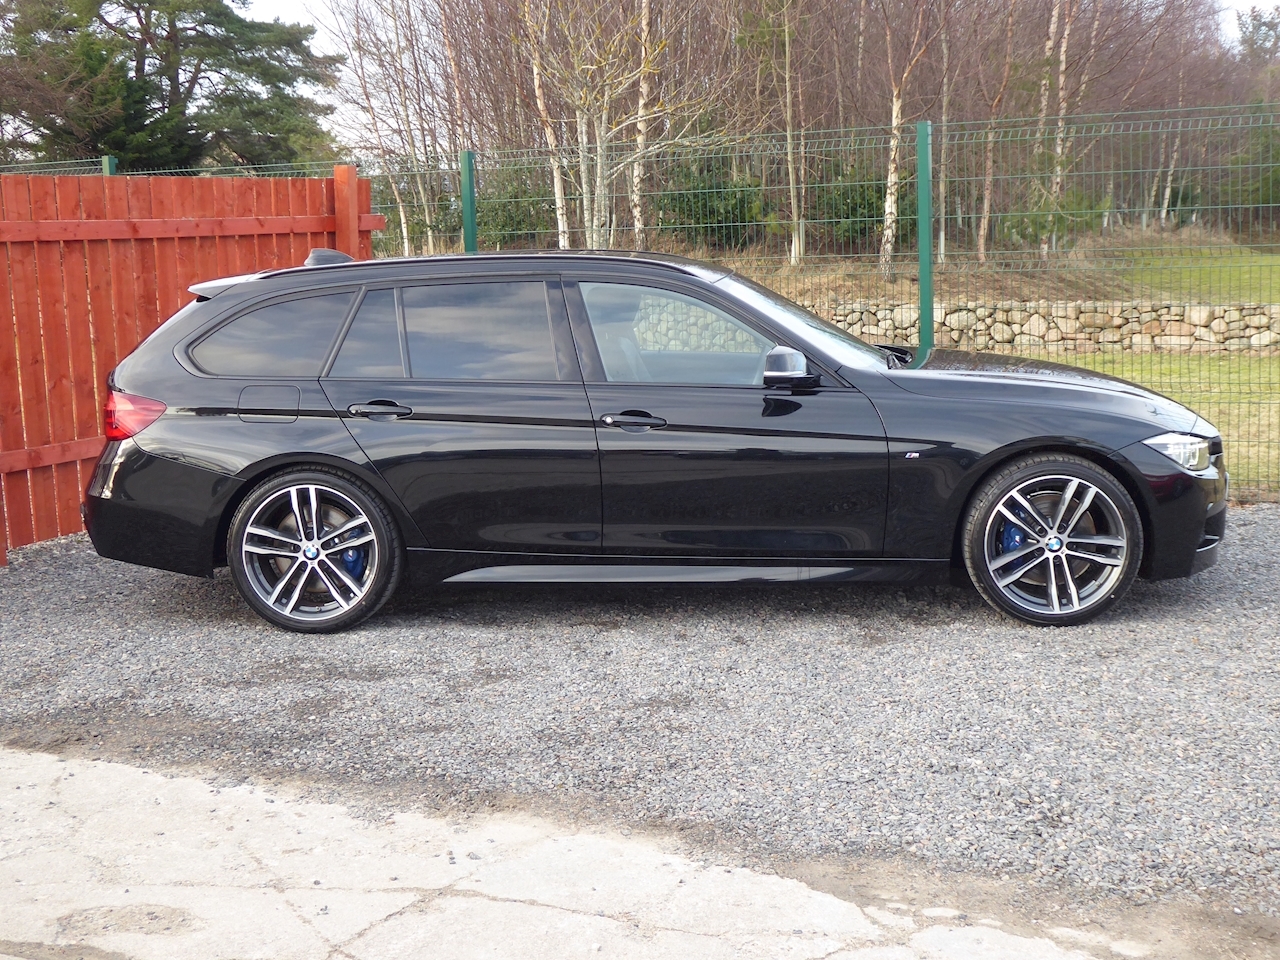 BMW F31 M-SPORT SHADOW EDITION for sale in Co. Mayo for